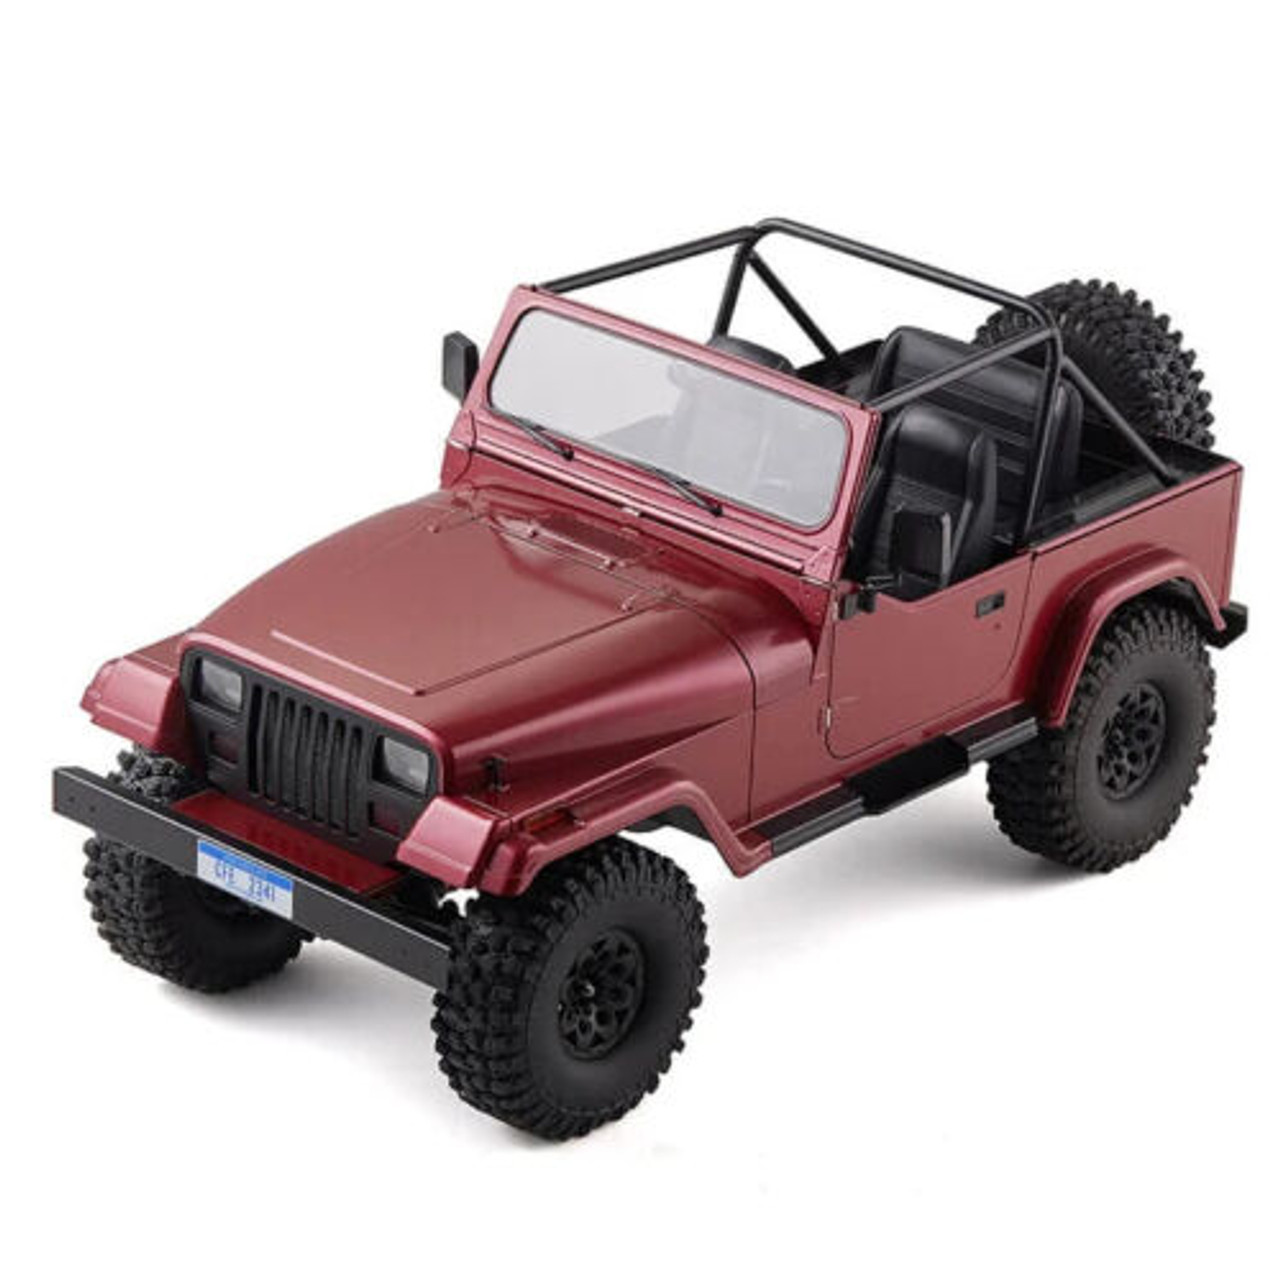 RC 1/10 JEEP WRANGLER 4X4 W/ LED Lights*RTR* RED